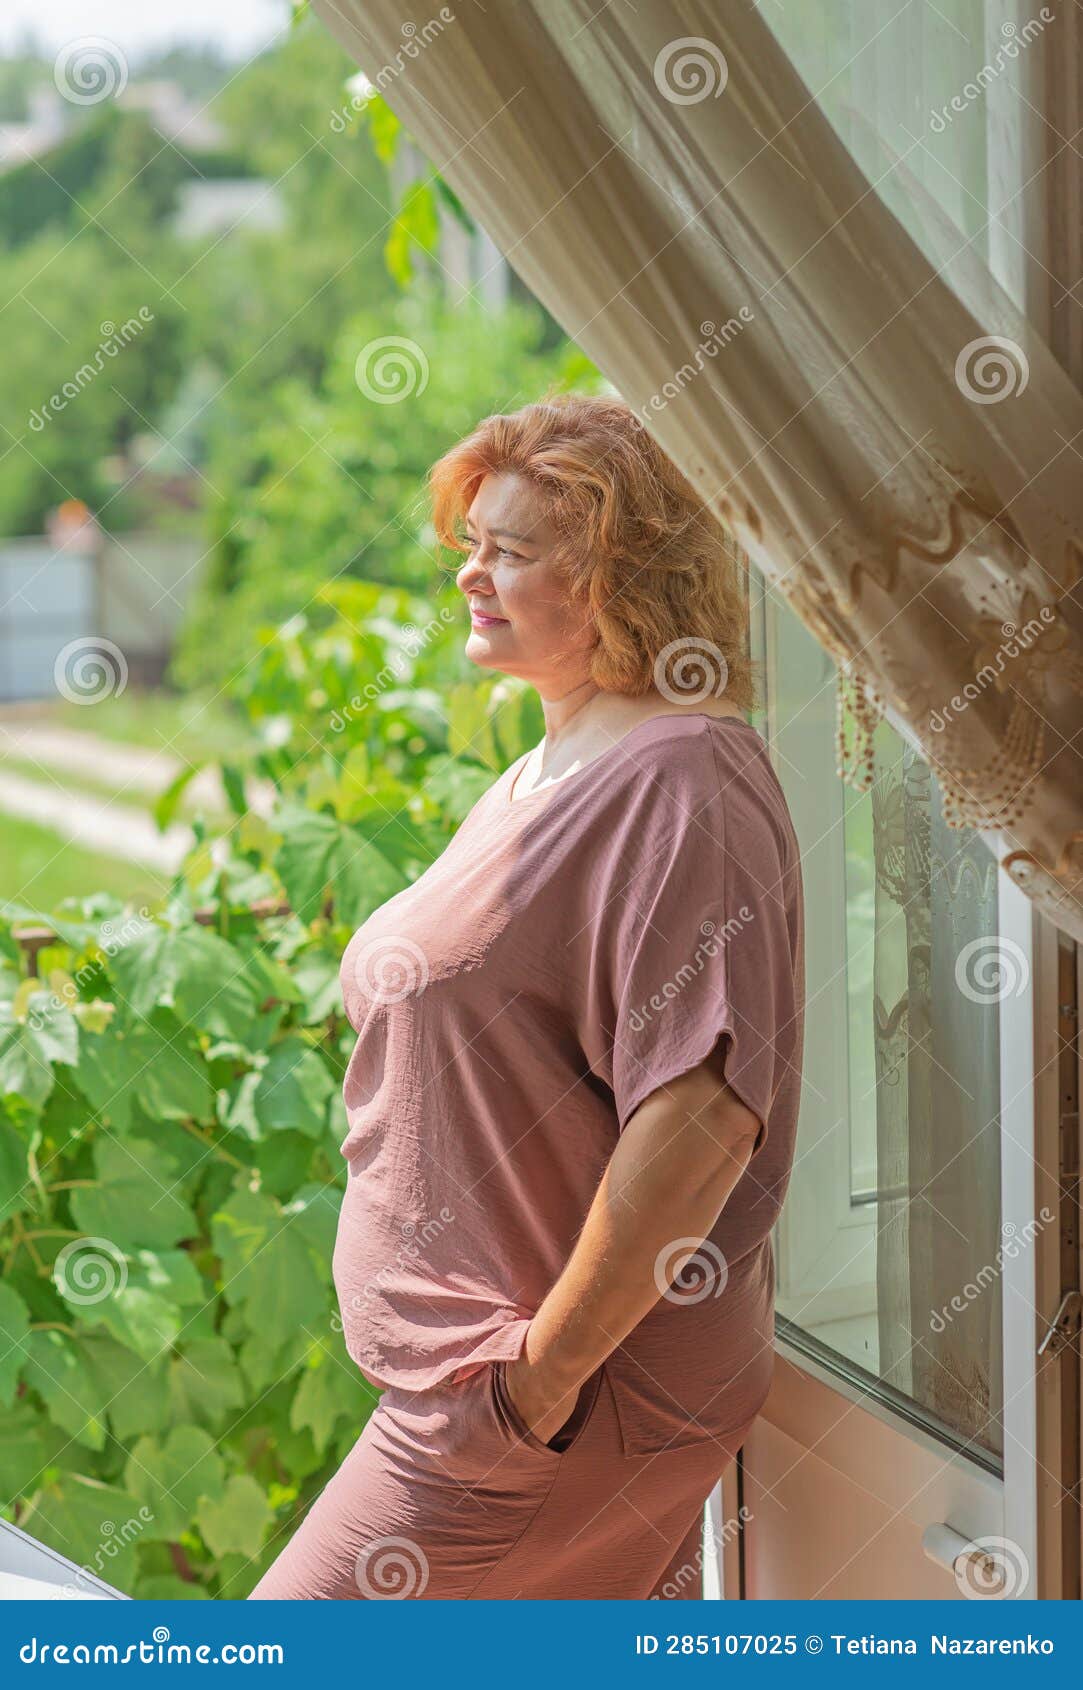 Plump Lady in Fashionable Clothes, Woman of 50-55 Years Old Stock